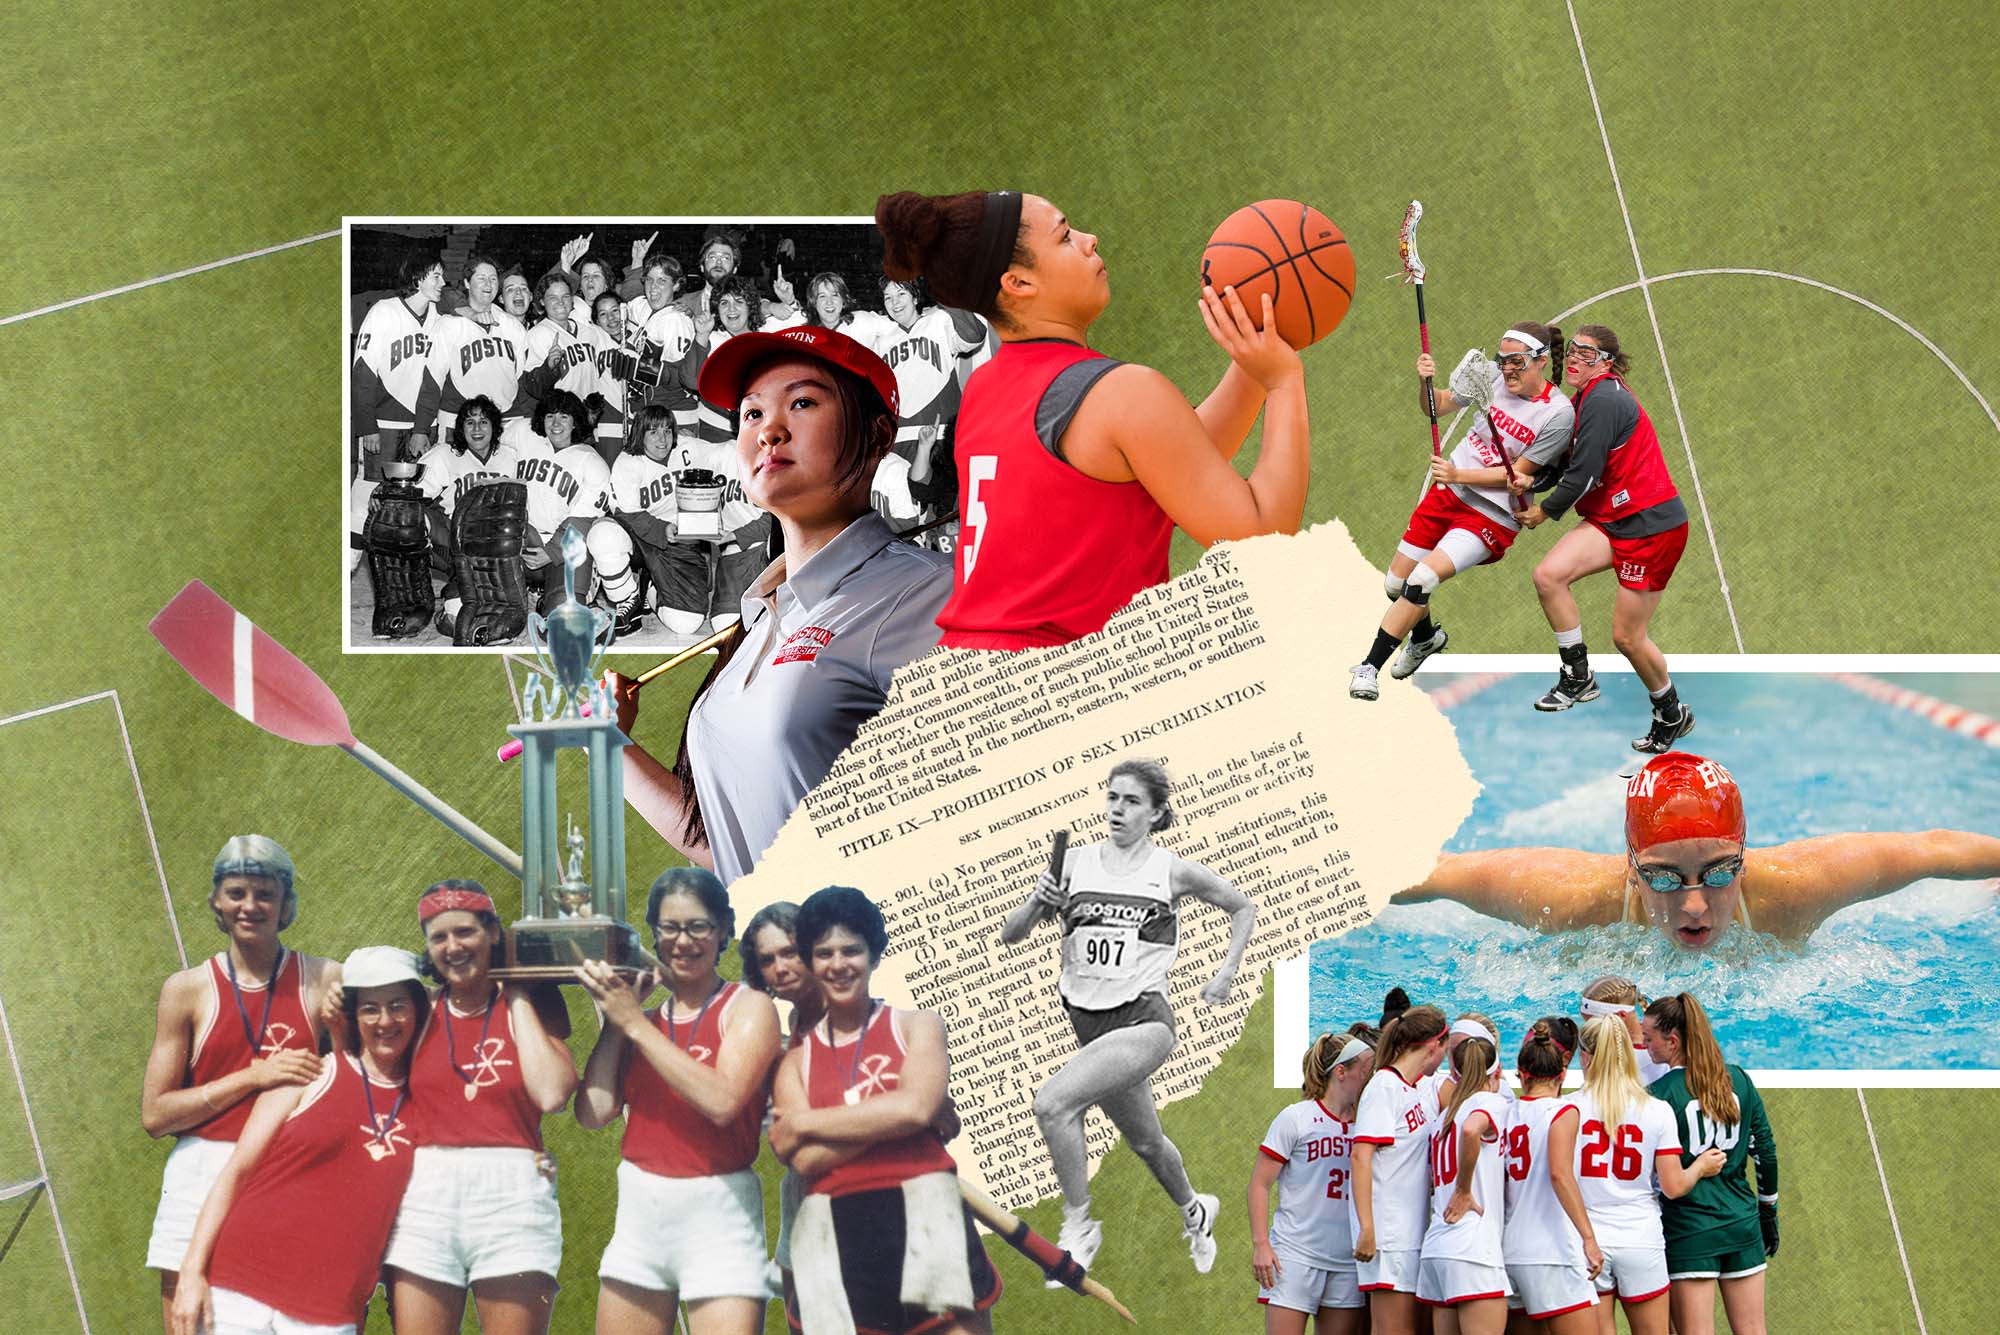 Title IX, Which Paved the Way for Women's Sports, Now Threatens Its Gains -  Verily